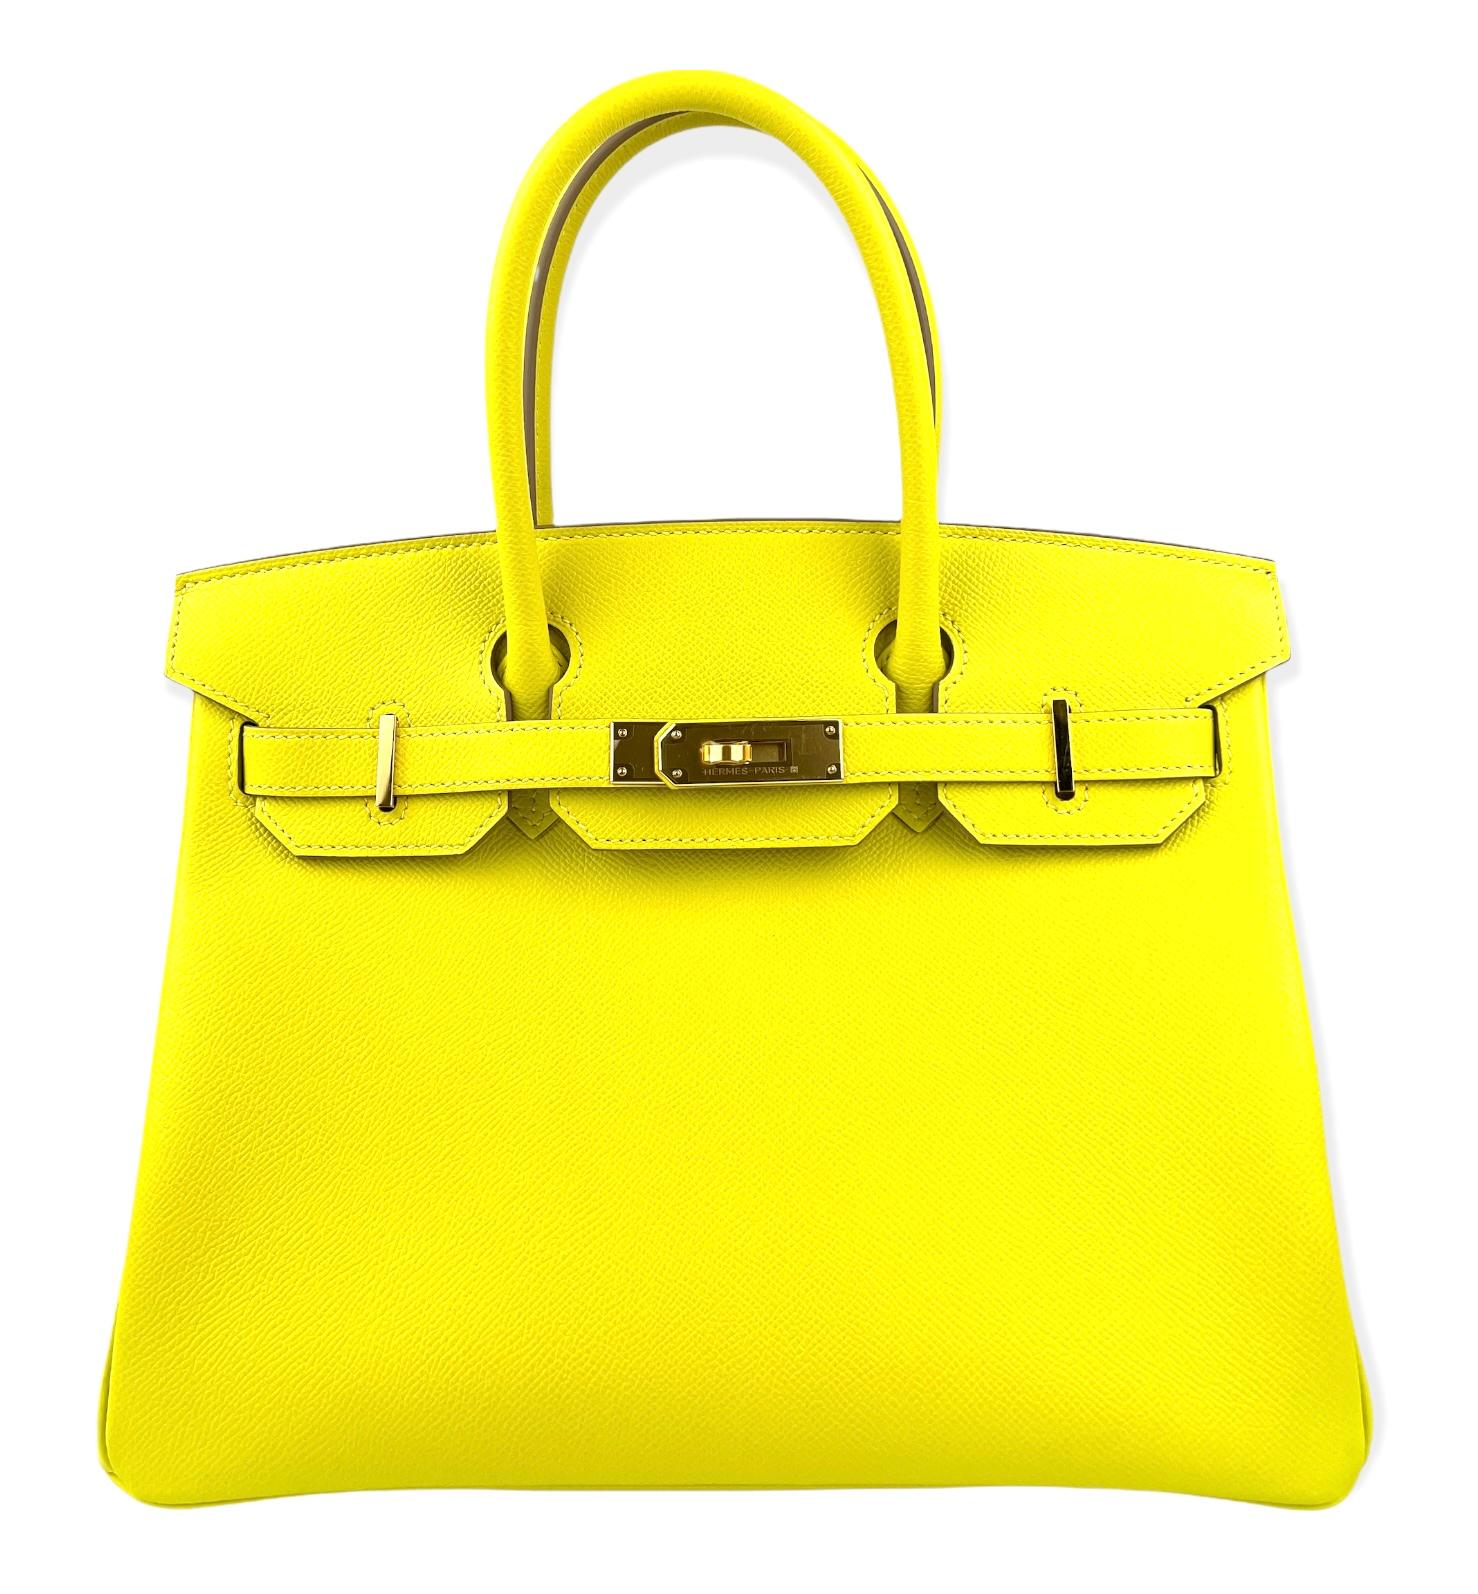 Stunning As New Hermes Birkin 30 Lime Yellow Epsom Gold Hardware. As New with Plastic on Hardware and Feet, Excellent corners and Structure. Y Stamp 2020.

Shop with confidence from Lux Addicts. Authenticity Guaranteed! 